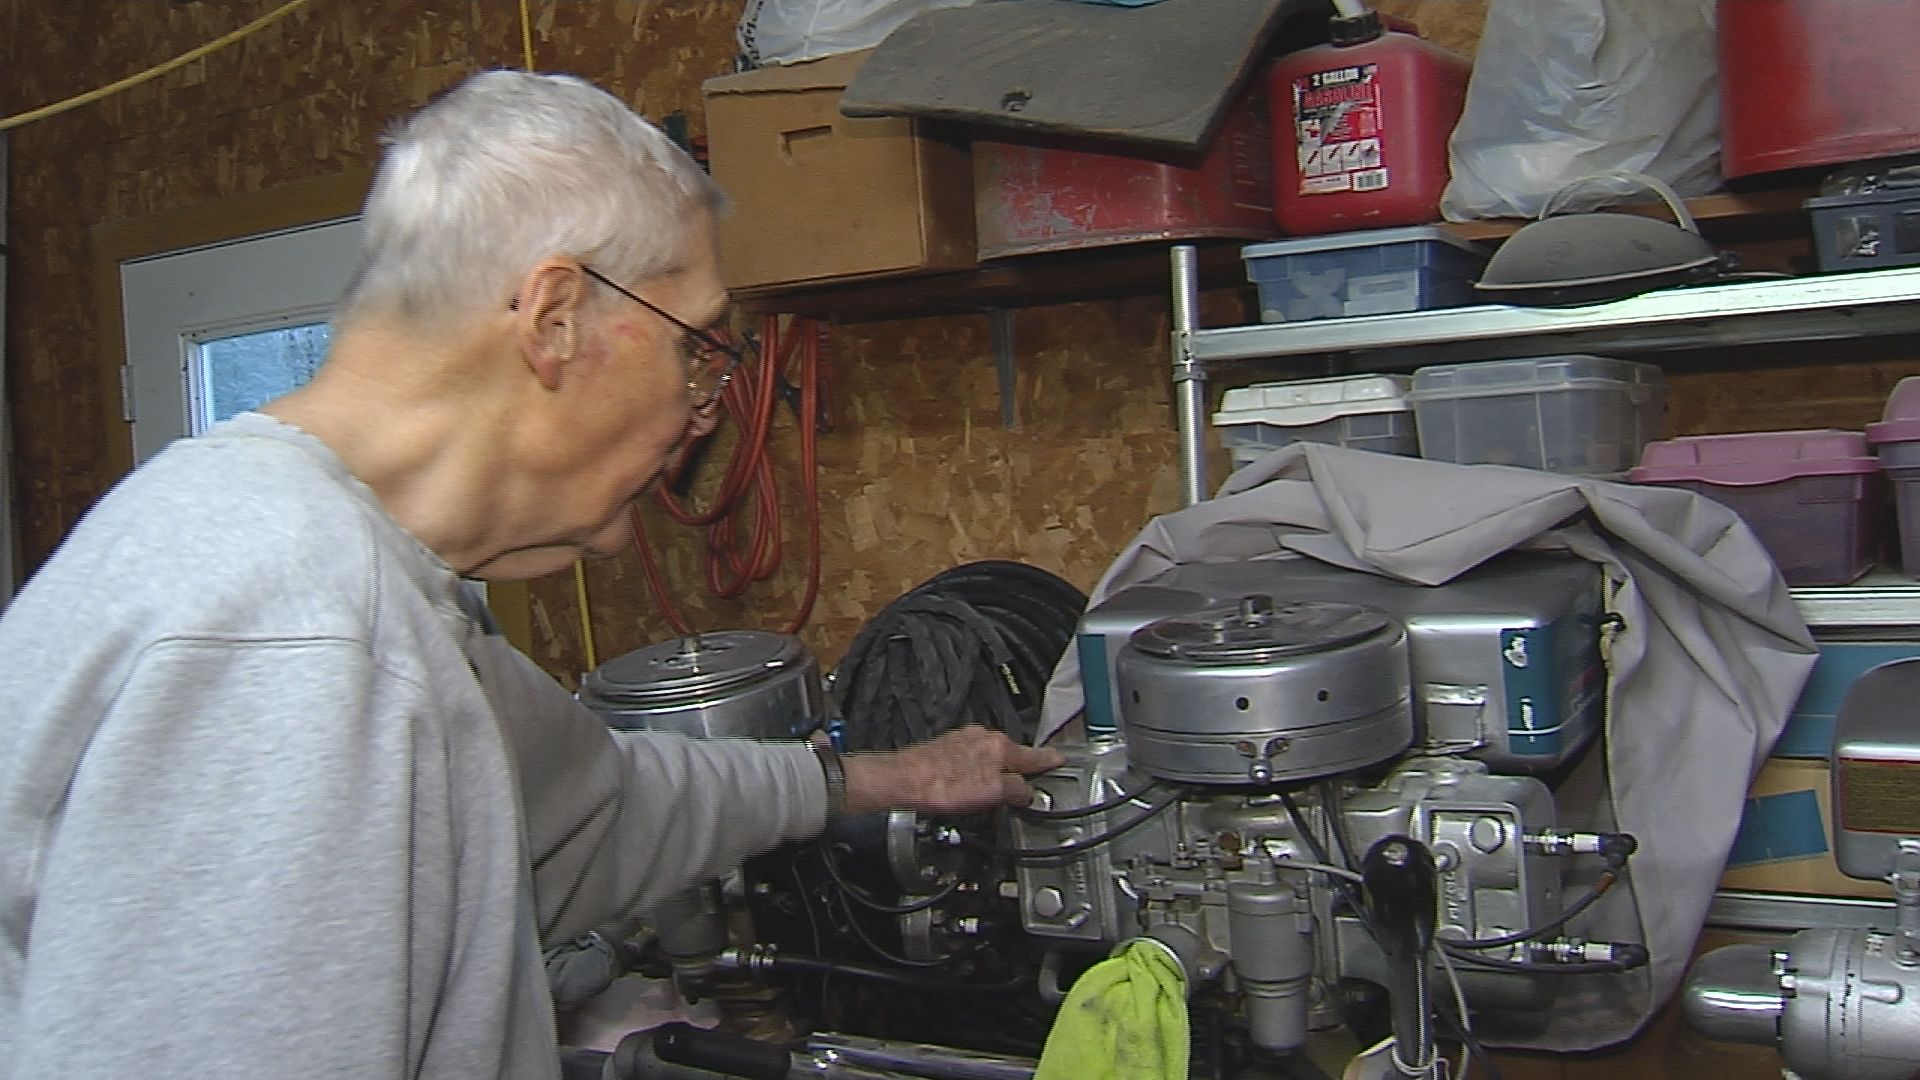 Fairview Man, 92, Still Collecting Antique Outboard Motors: The Last Word